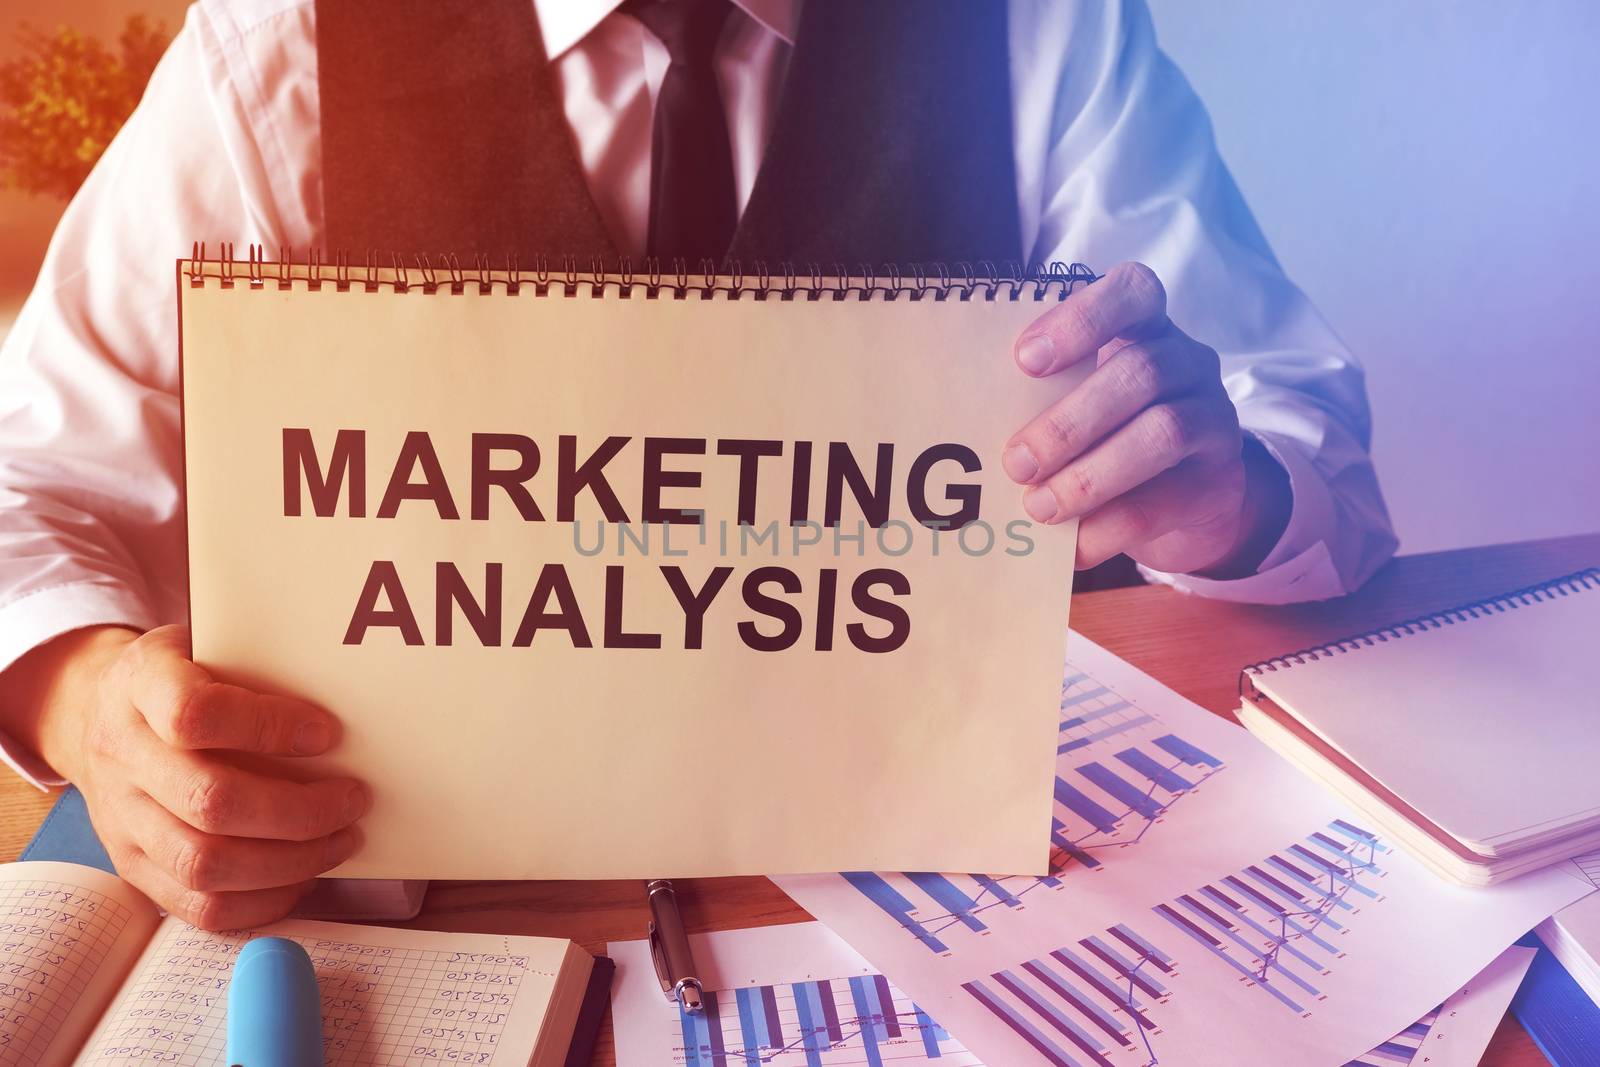 Marketing analysis report and business papers.